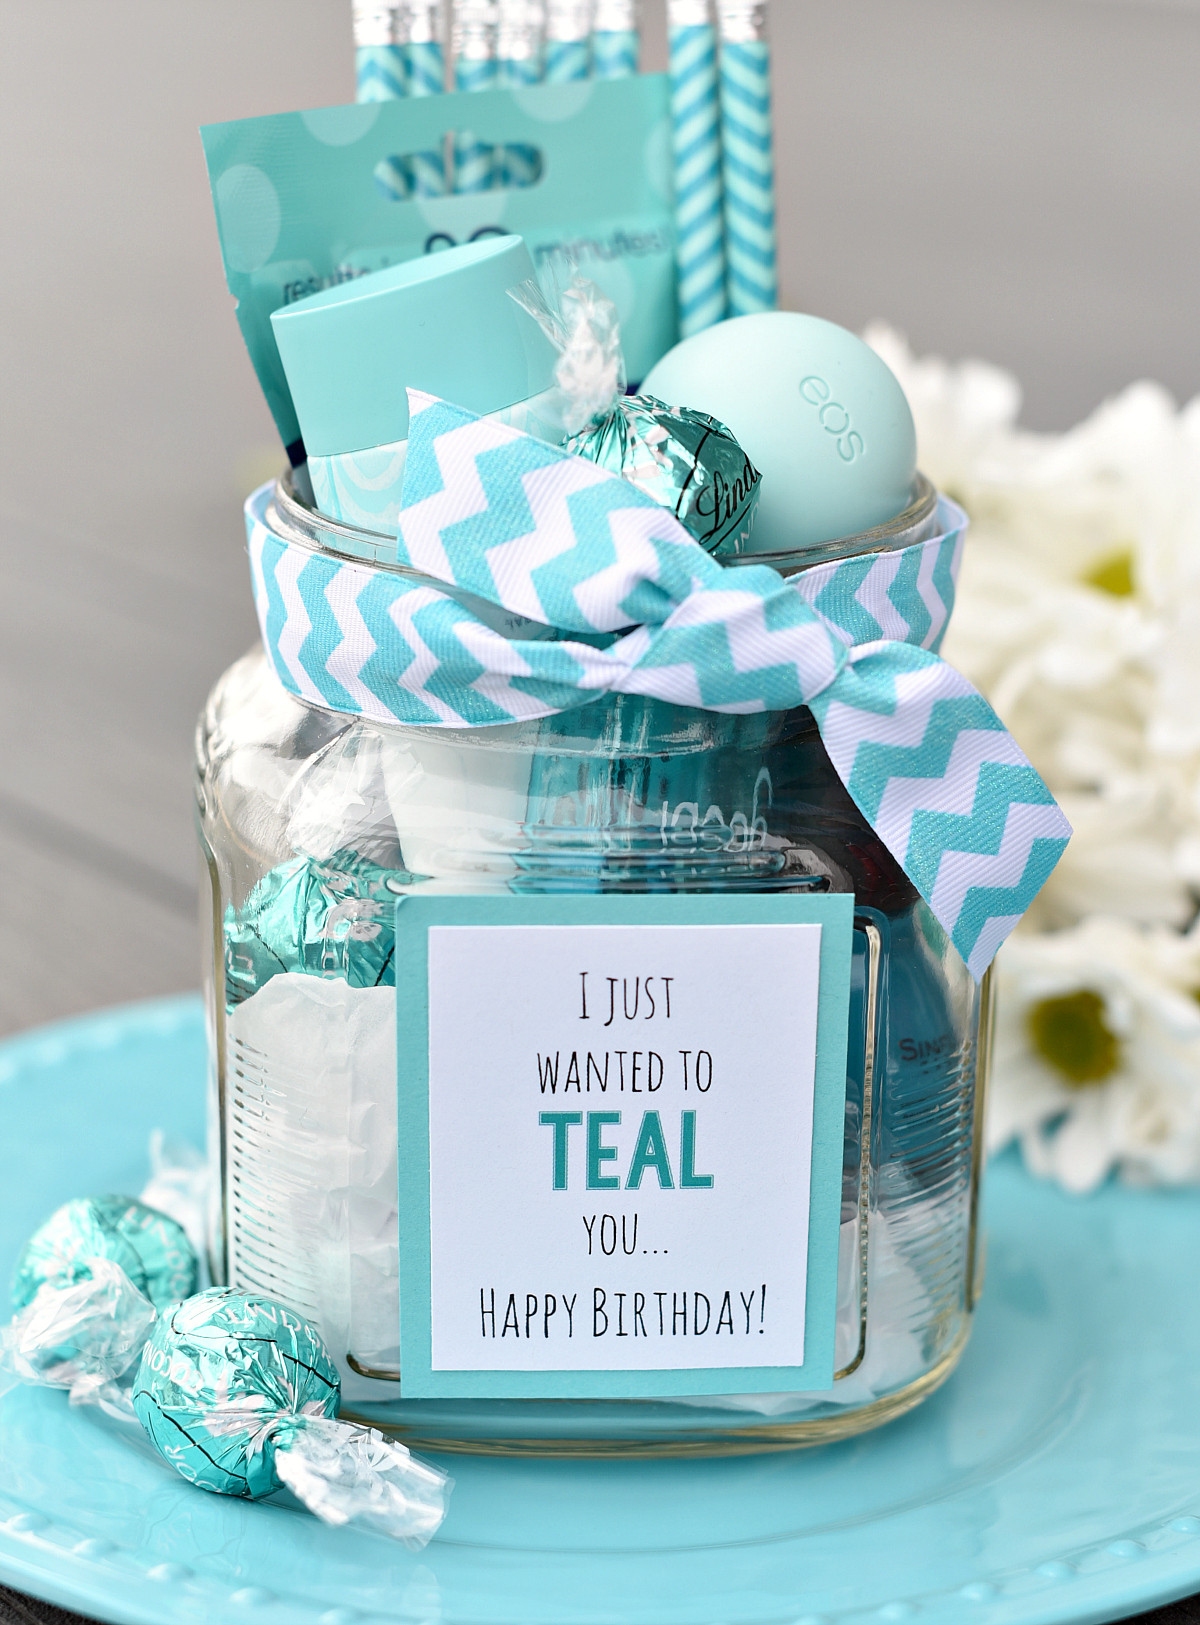 Gift Ideas For Best Friends
 Teal Birthday Gift Idea for Friends – Fun Squared